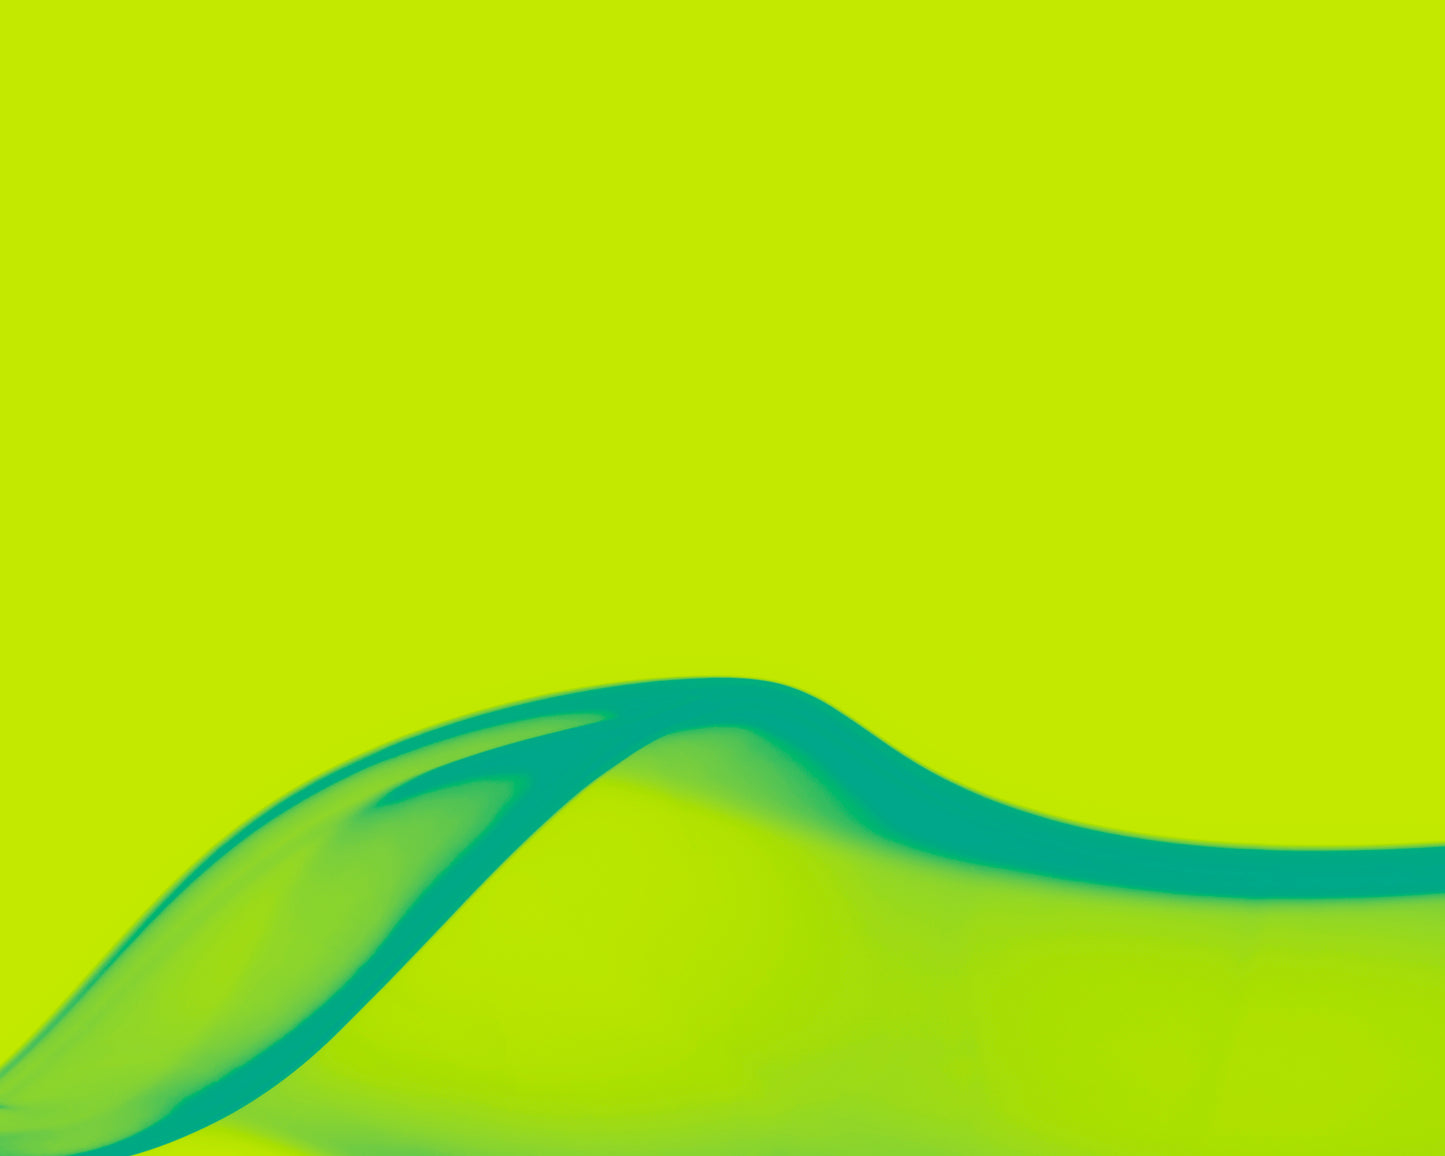 abstract photo teal blue wave at the bottom on lime green overall